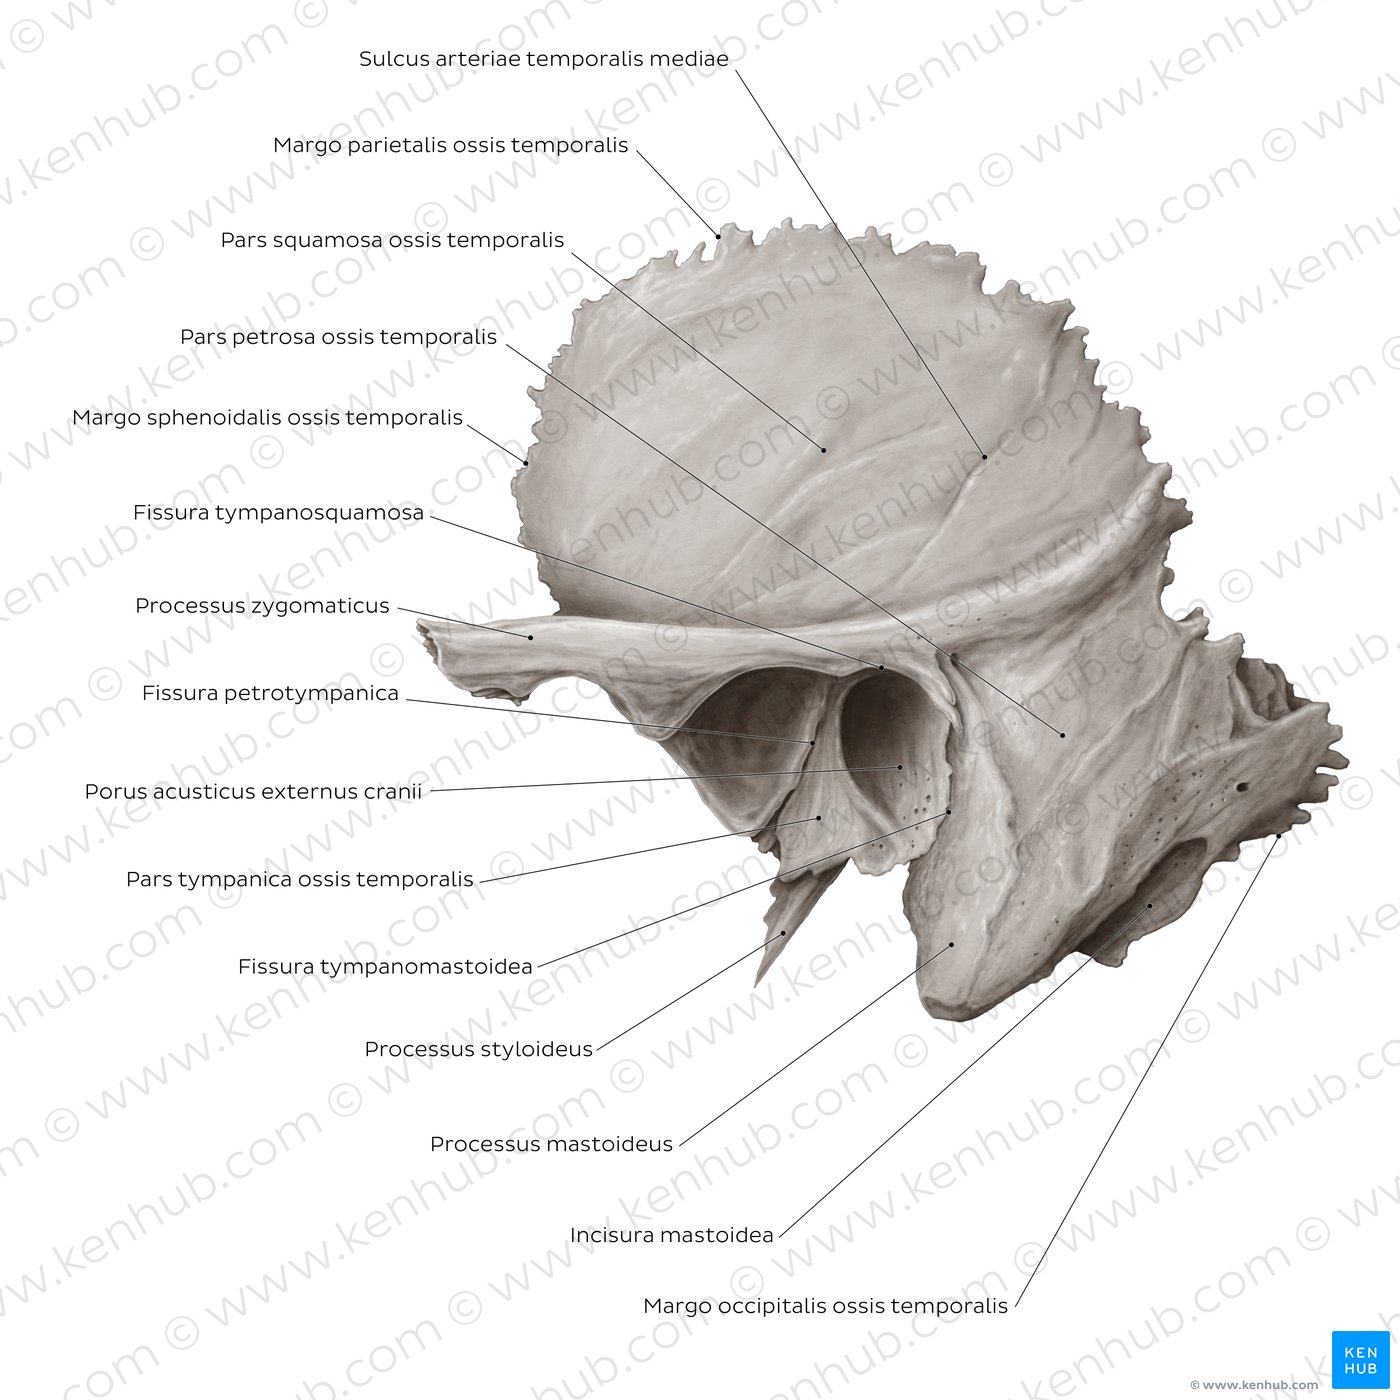 Temporal bone (lateral view)